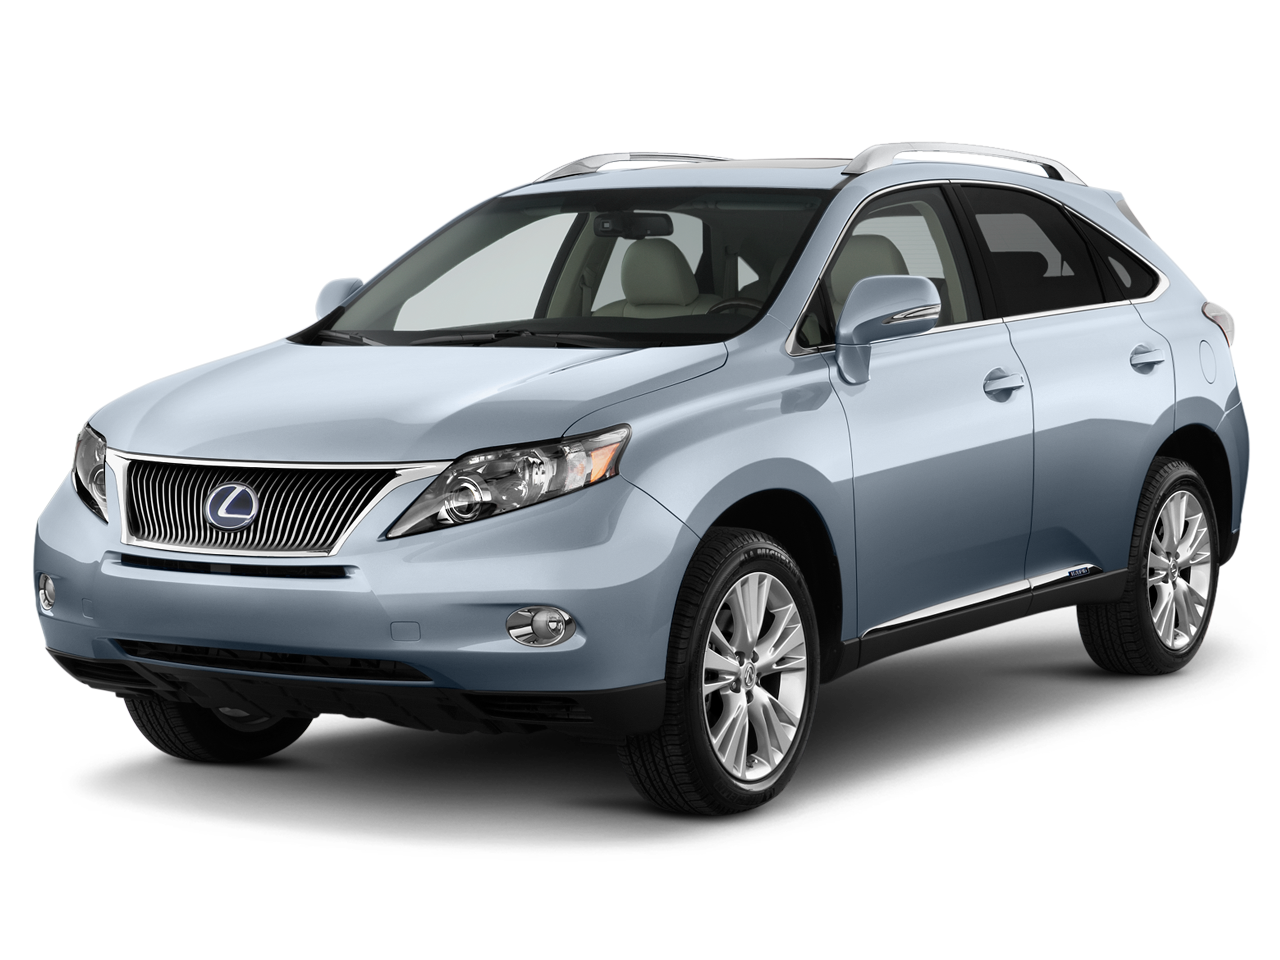 2012 Lexus RX450h Prices, Reviews, and Photos - MotorTrend